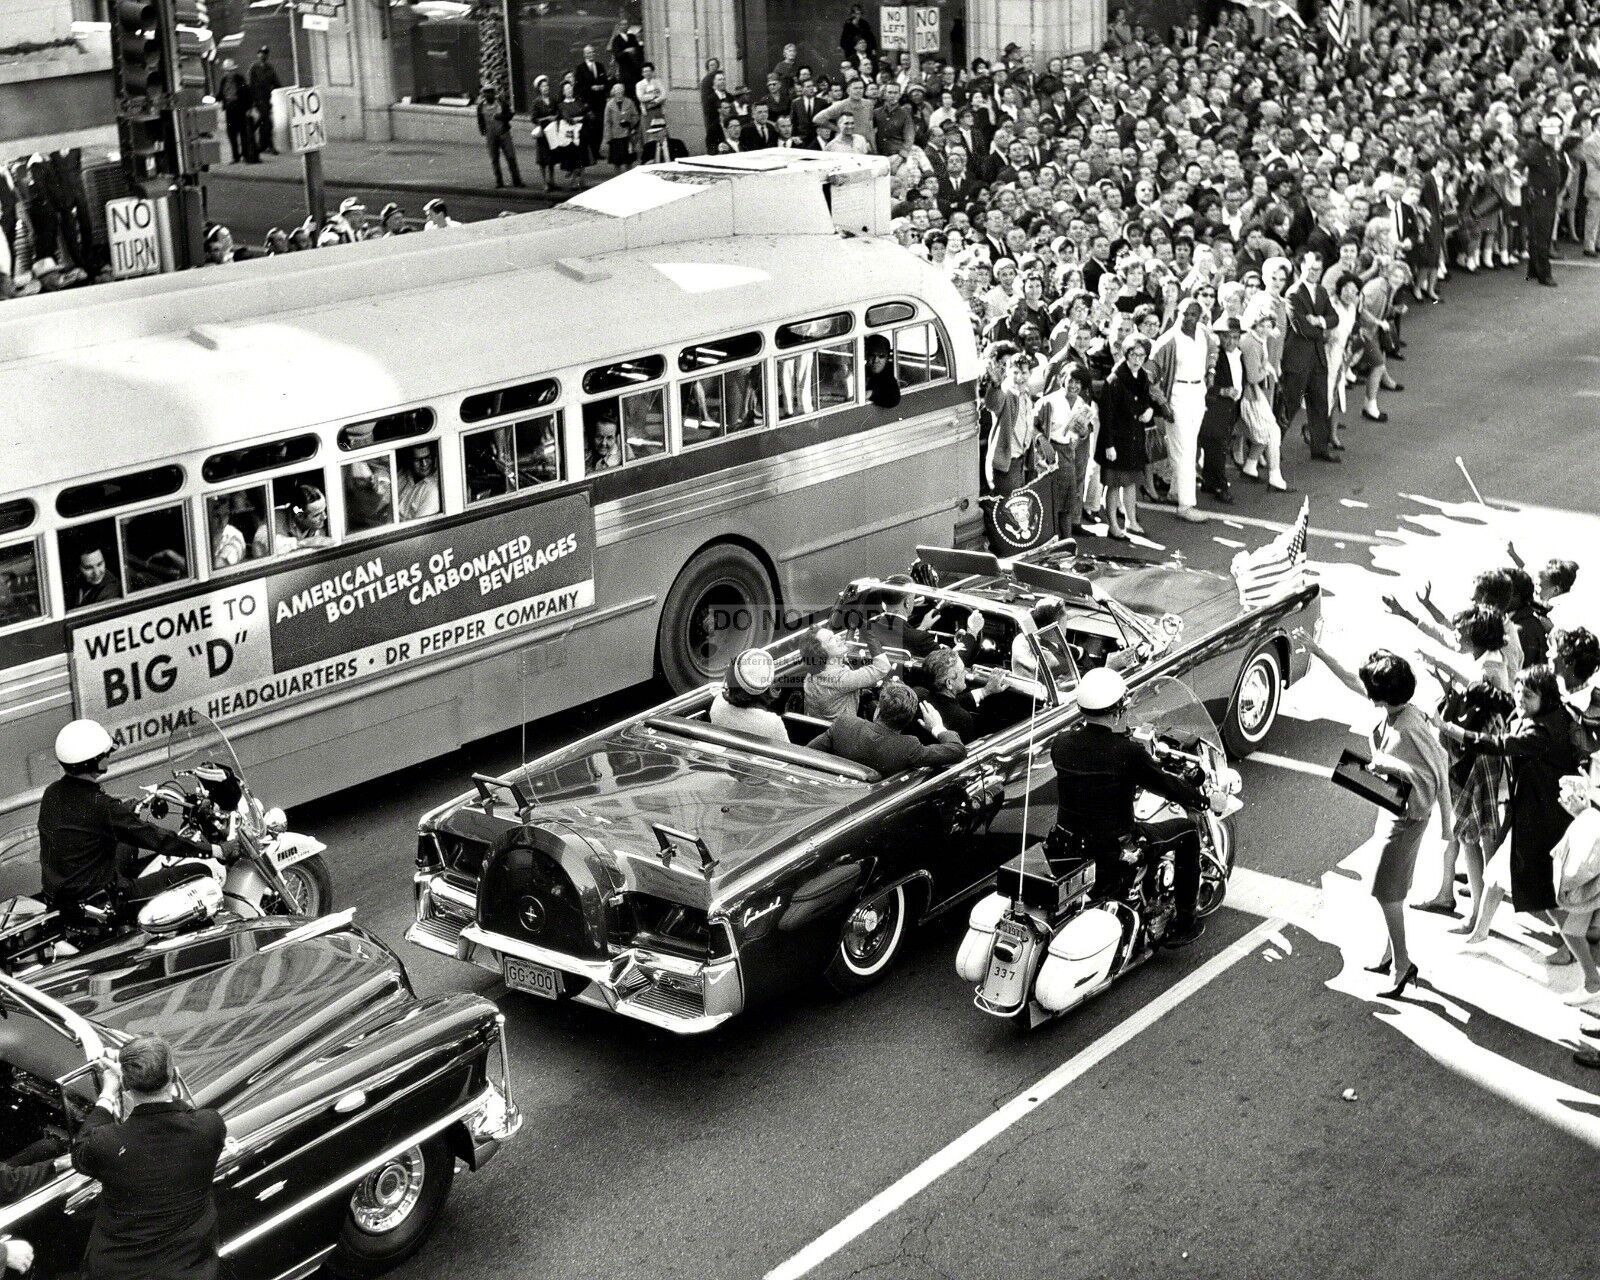 PRESIDENT JOHN F KENNEDY LIMO APPROACHES DEALEY PLAZA 112263 8X10 PHOTO (AA-257)